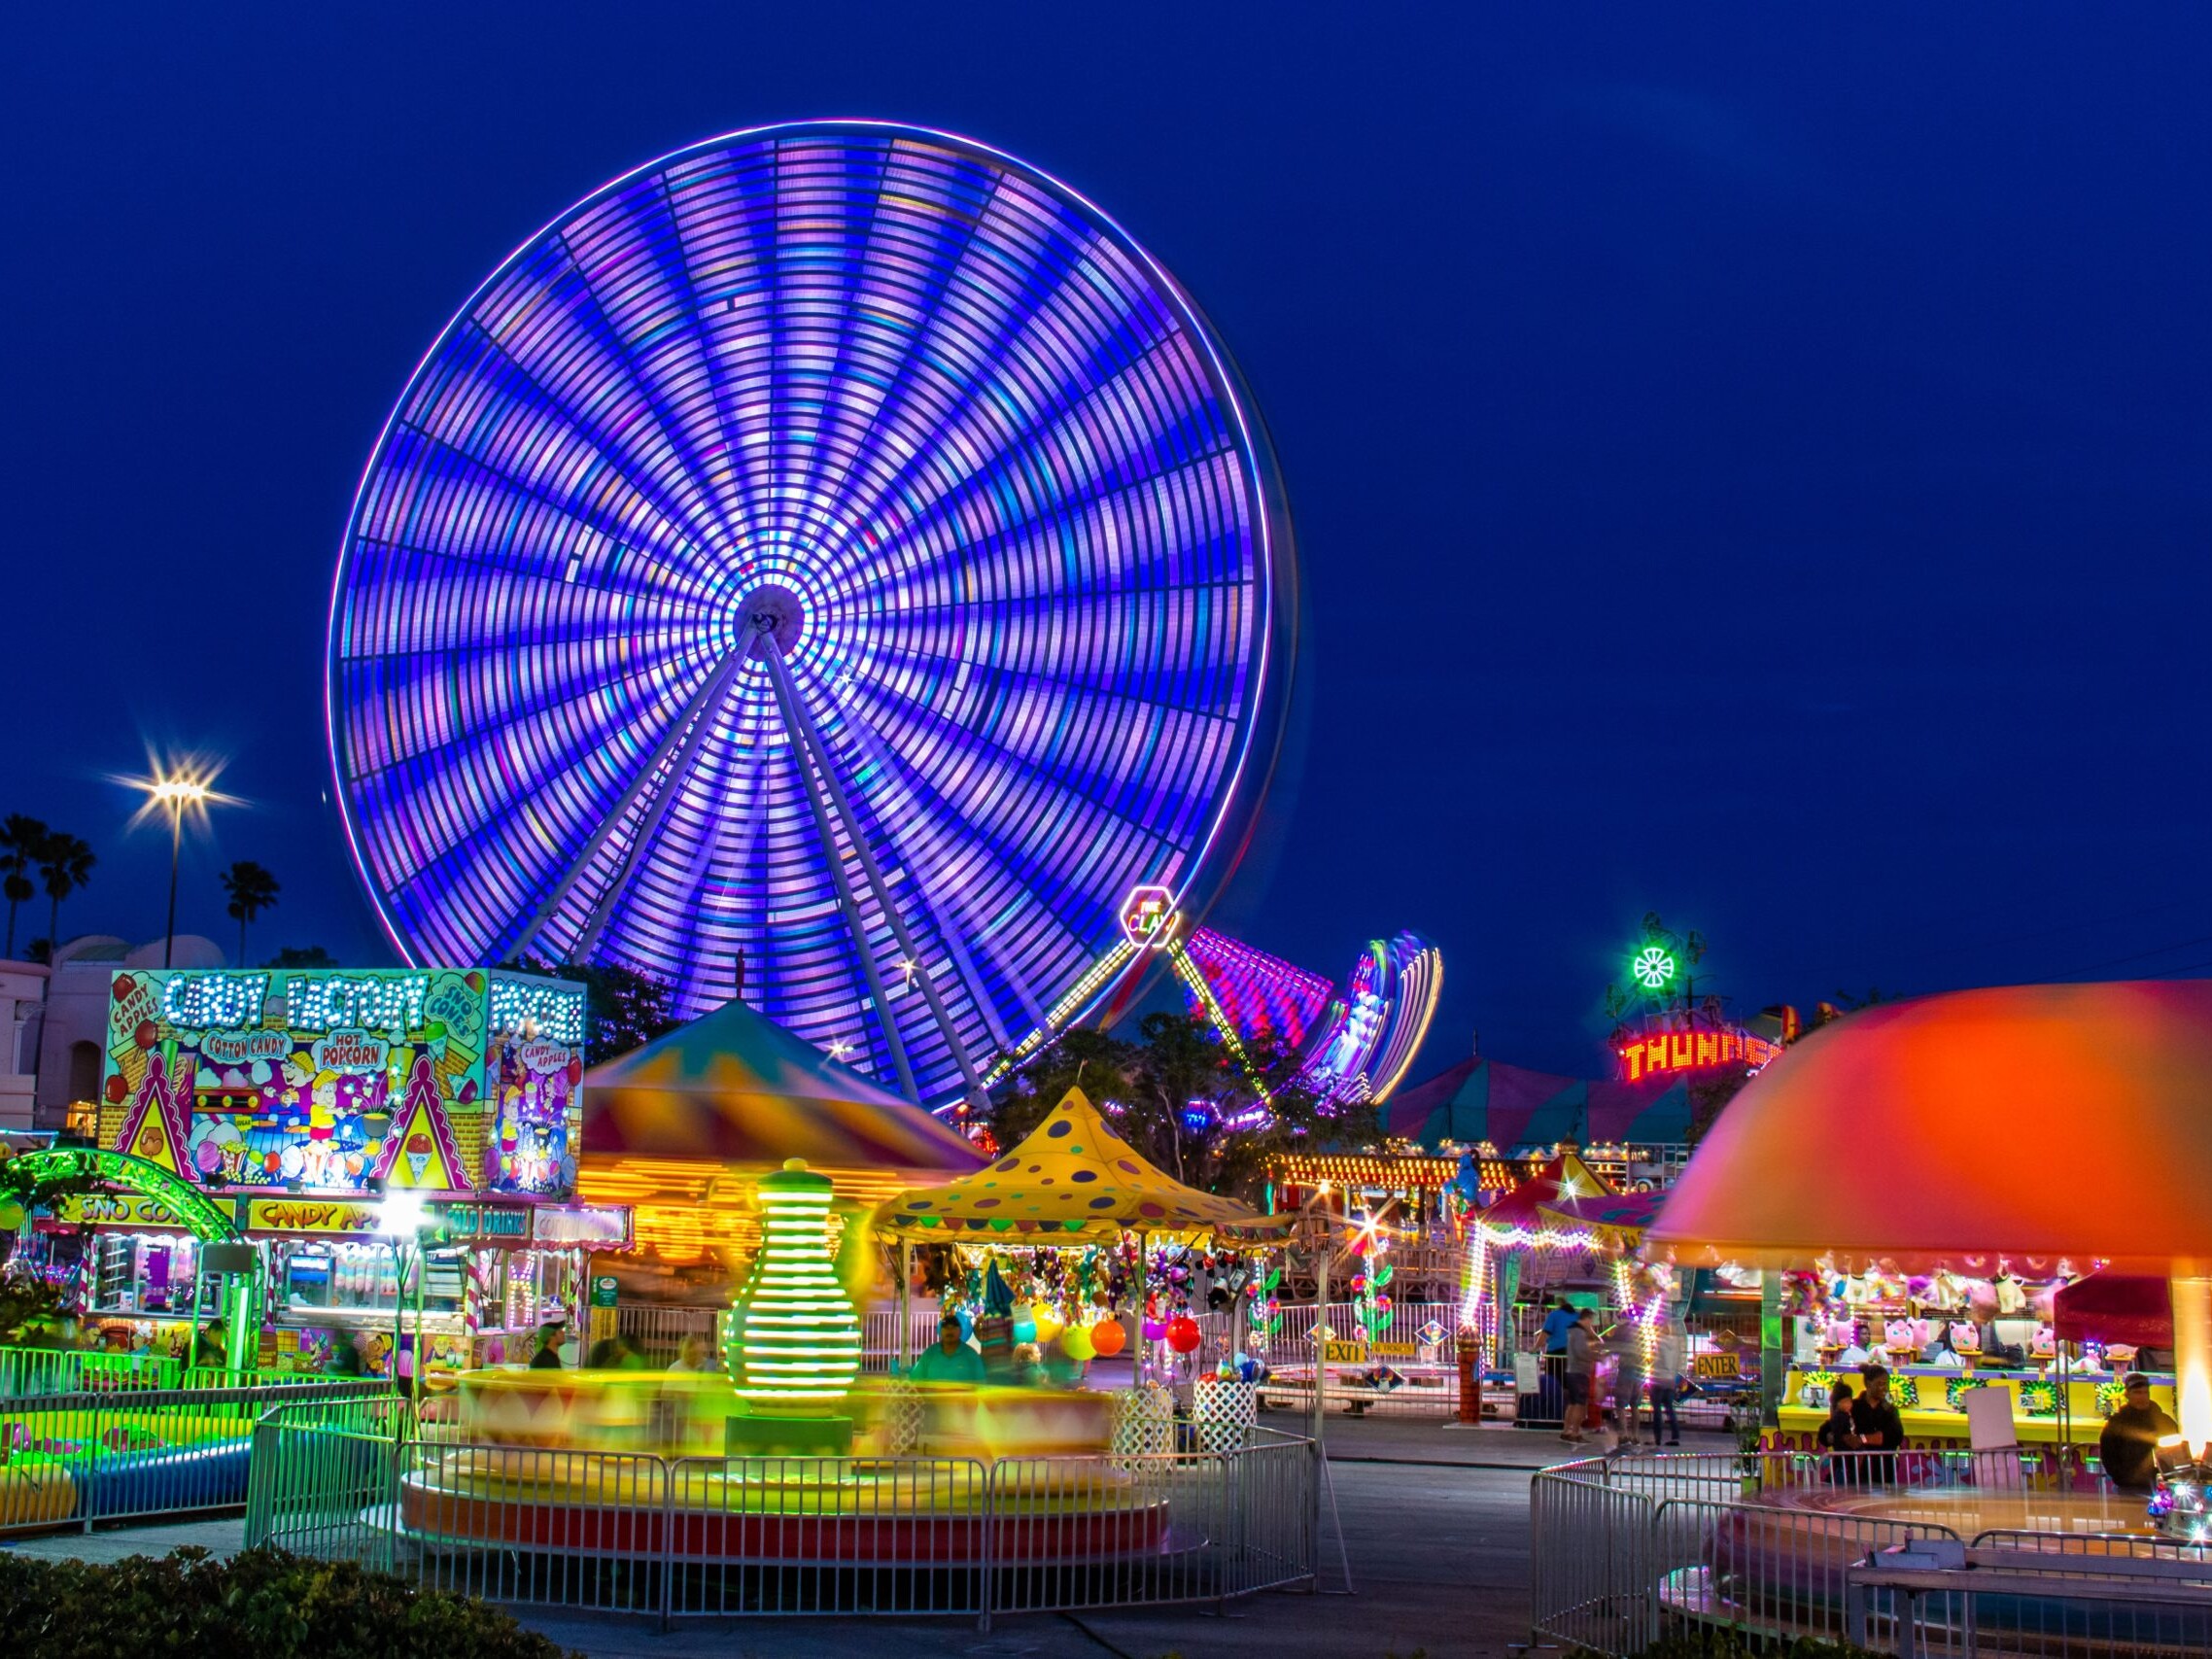 Amusement park rides and Faris wheel at night with fast moving neon lights